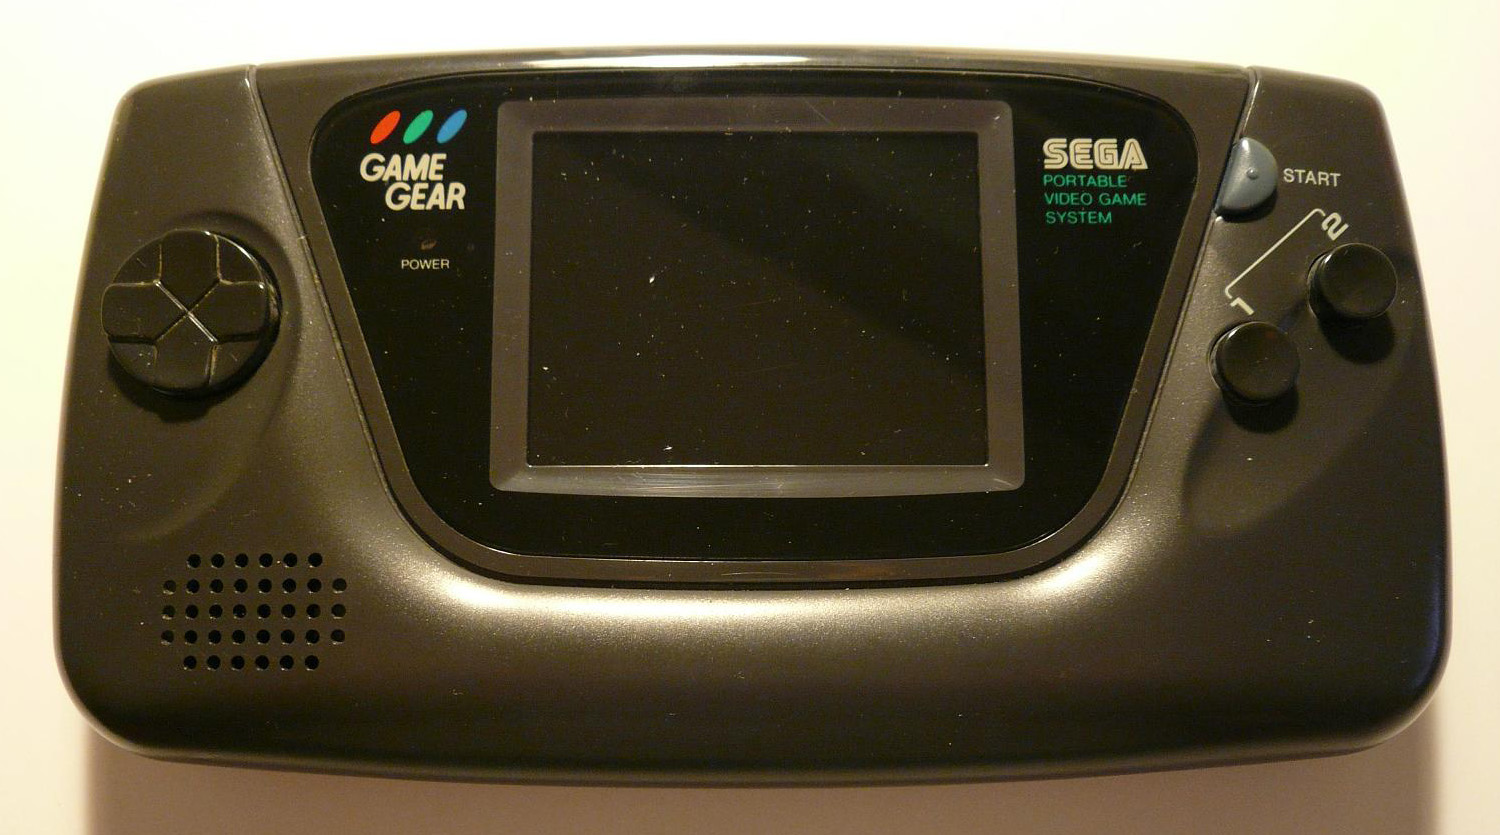 Ultimate game gear. Сега гейм Геар. Sega game Gear TV. Sega Portable 1990. Game Gear Sega Portable.